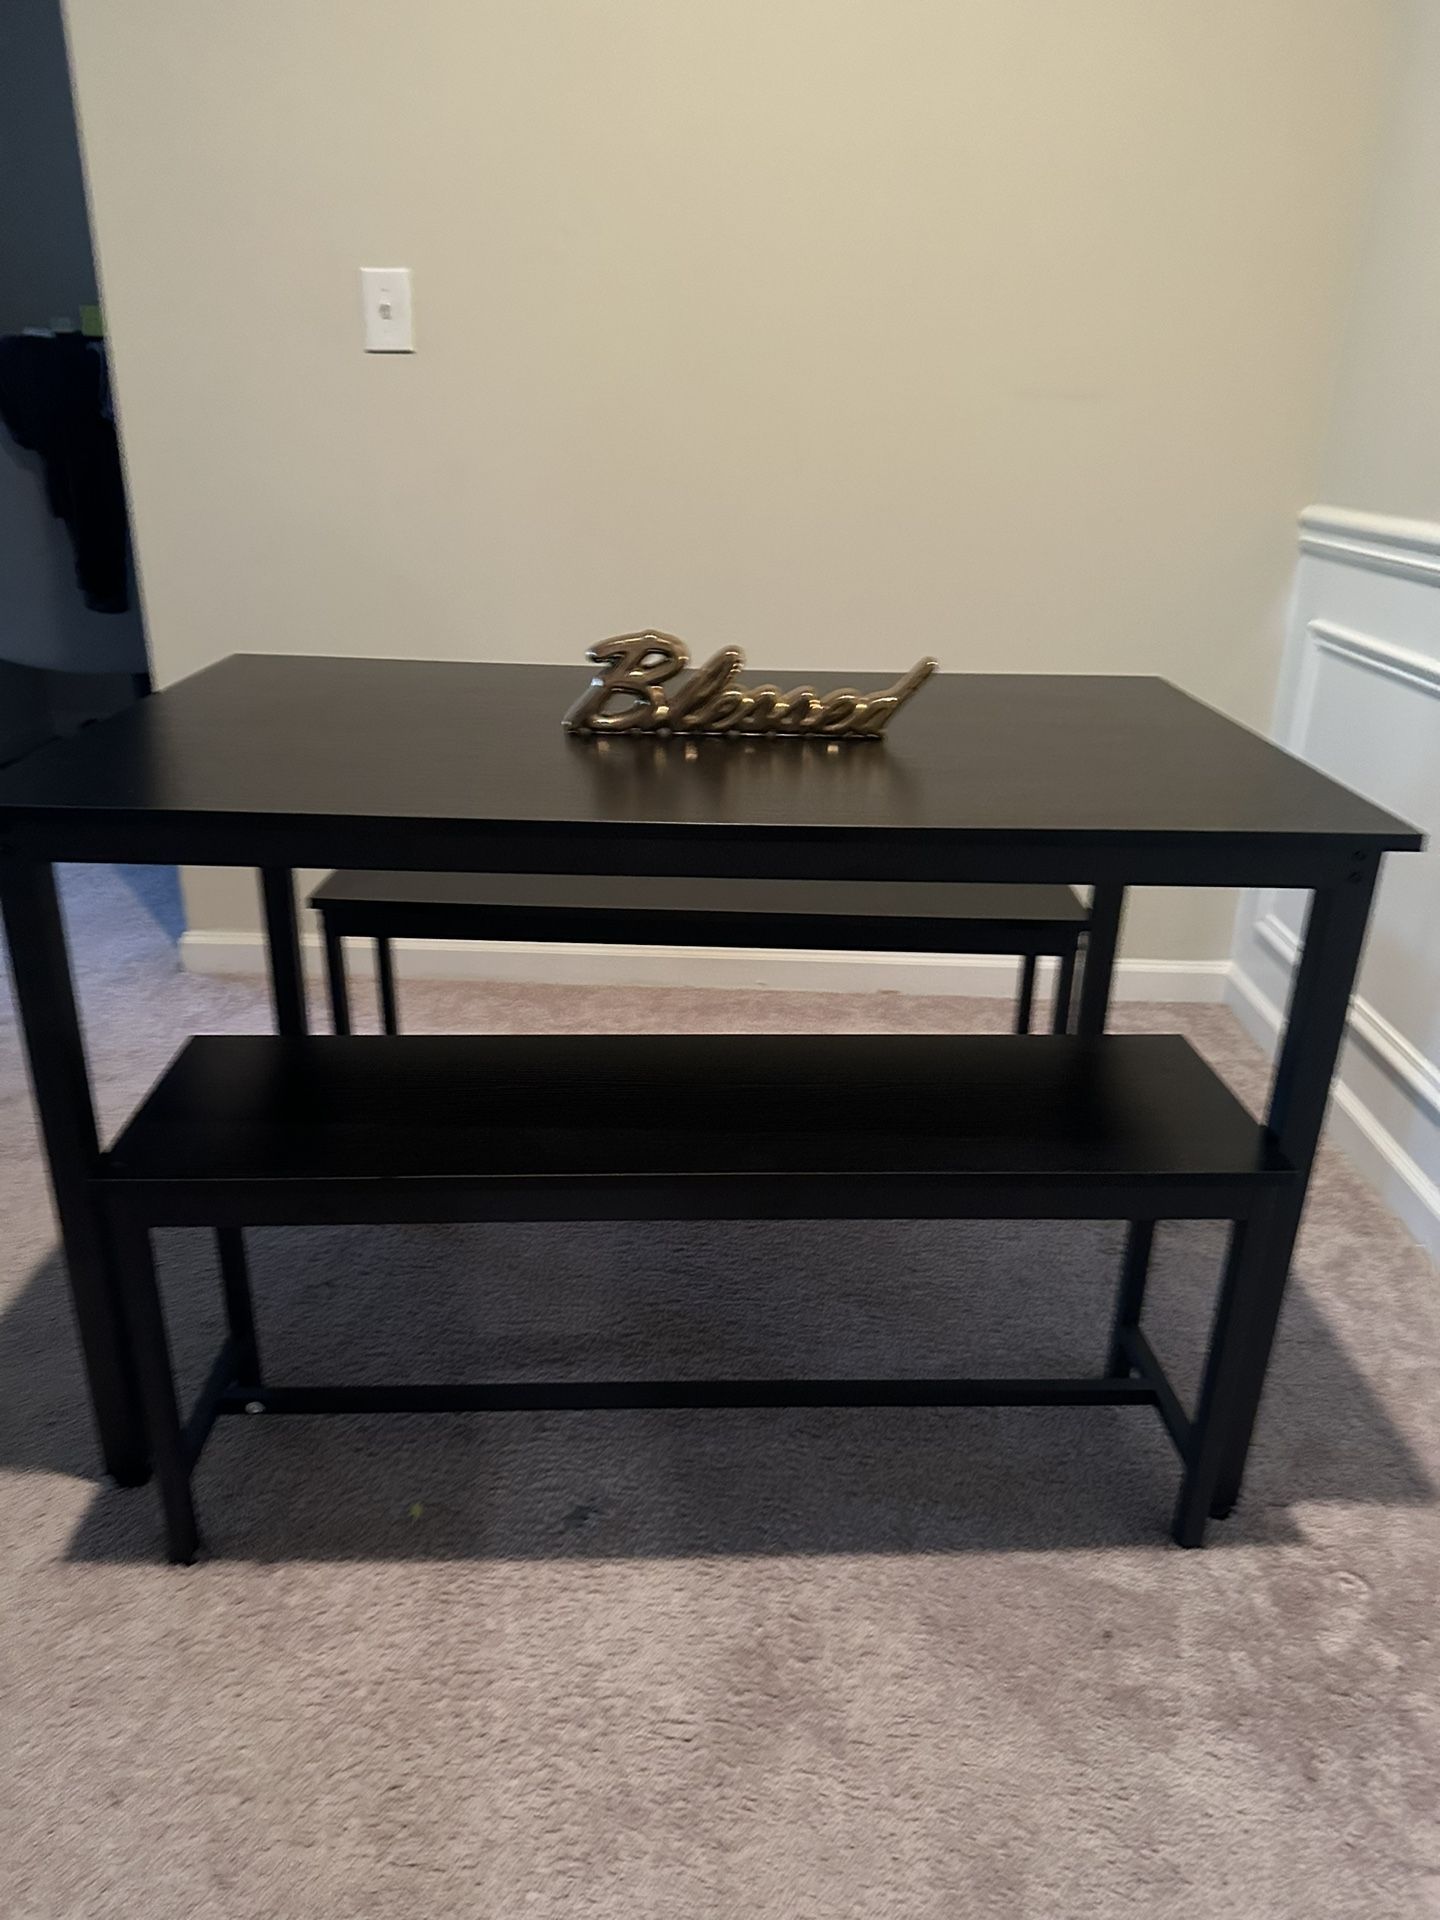 Black Dining Table Or A Crafting Table